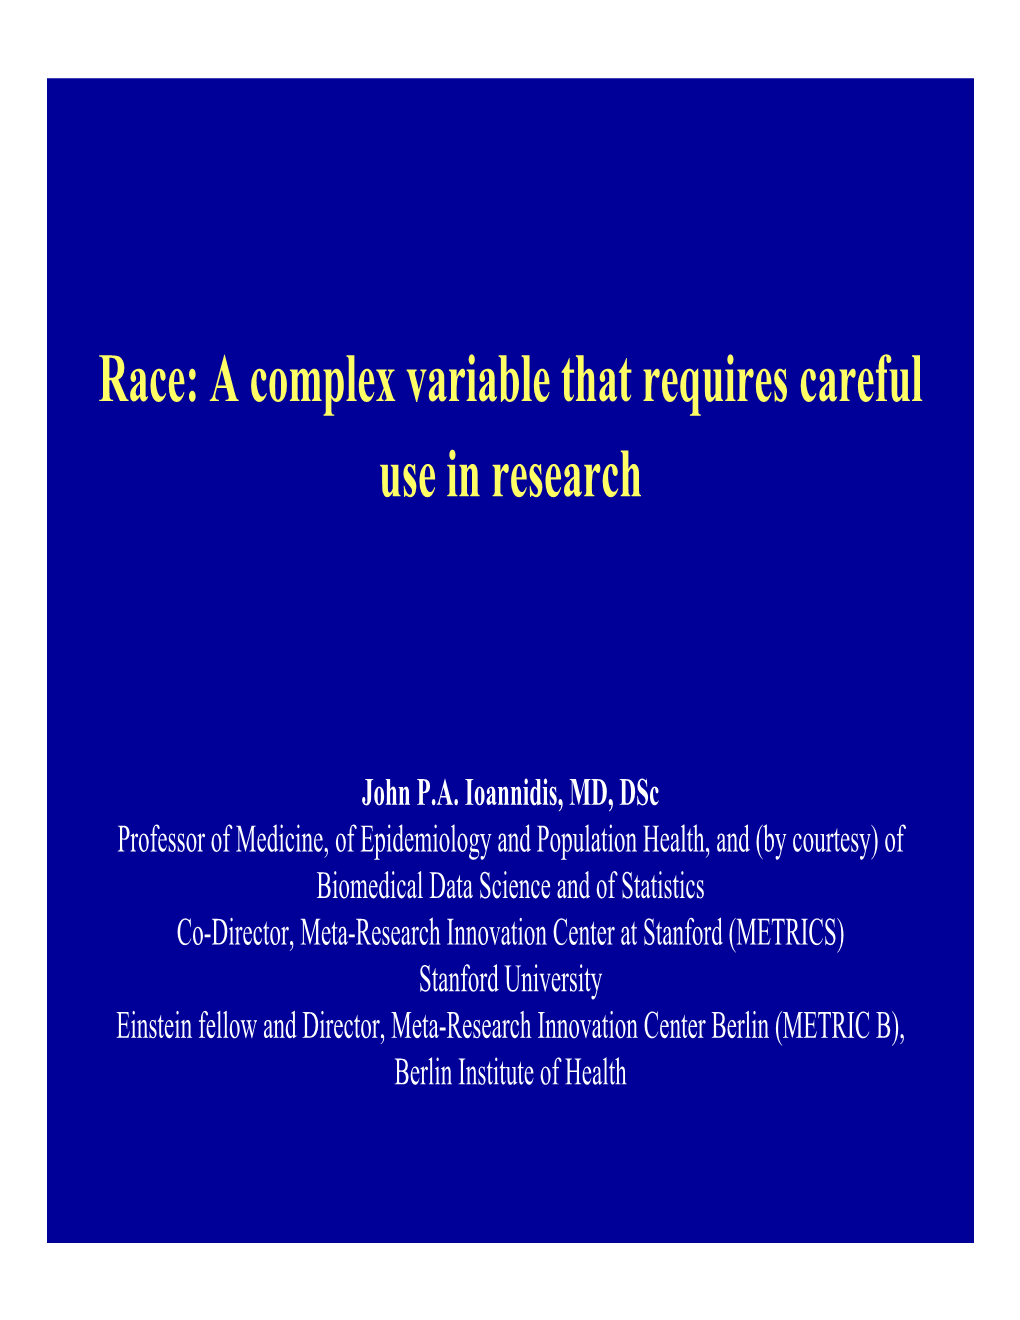 Race: a Complex Variable That Requires Careful Use in Research